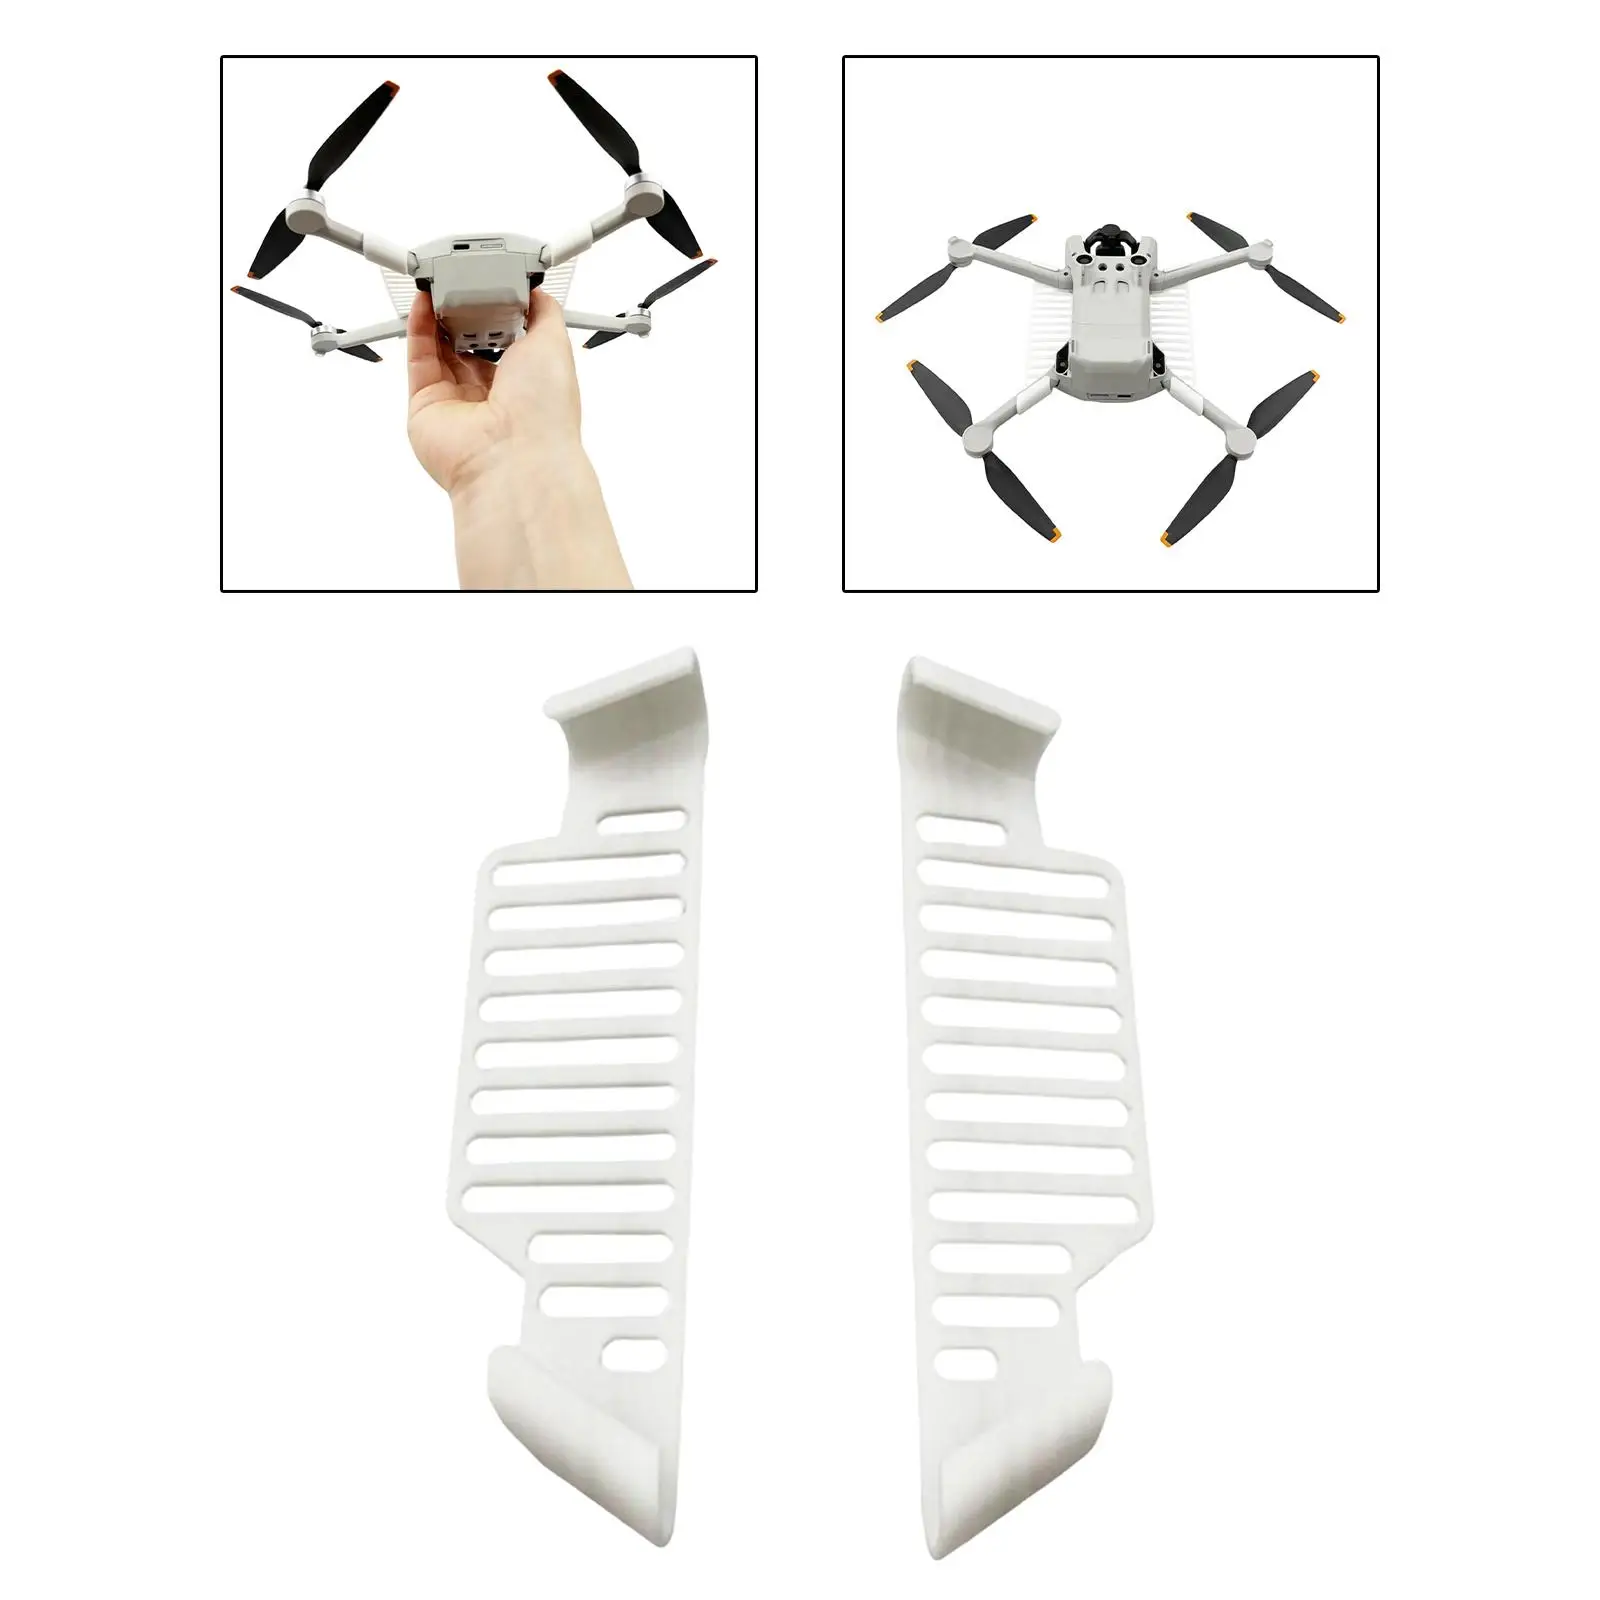 2 Pcs Landing Hand Safety Bracket Hand Protect Supplies Handheld Durable Plastic Stable Landing Hand Safety Gear for DJI Mini